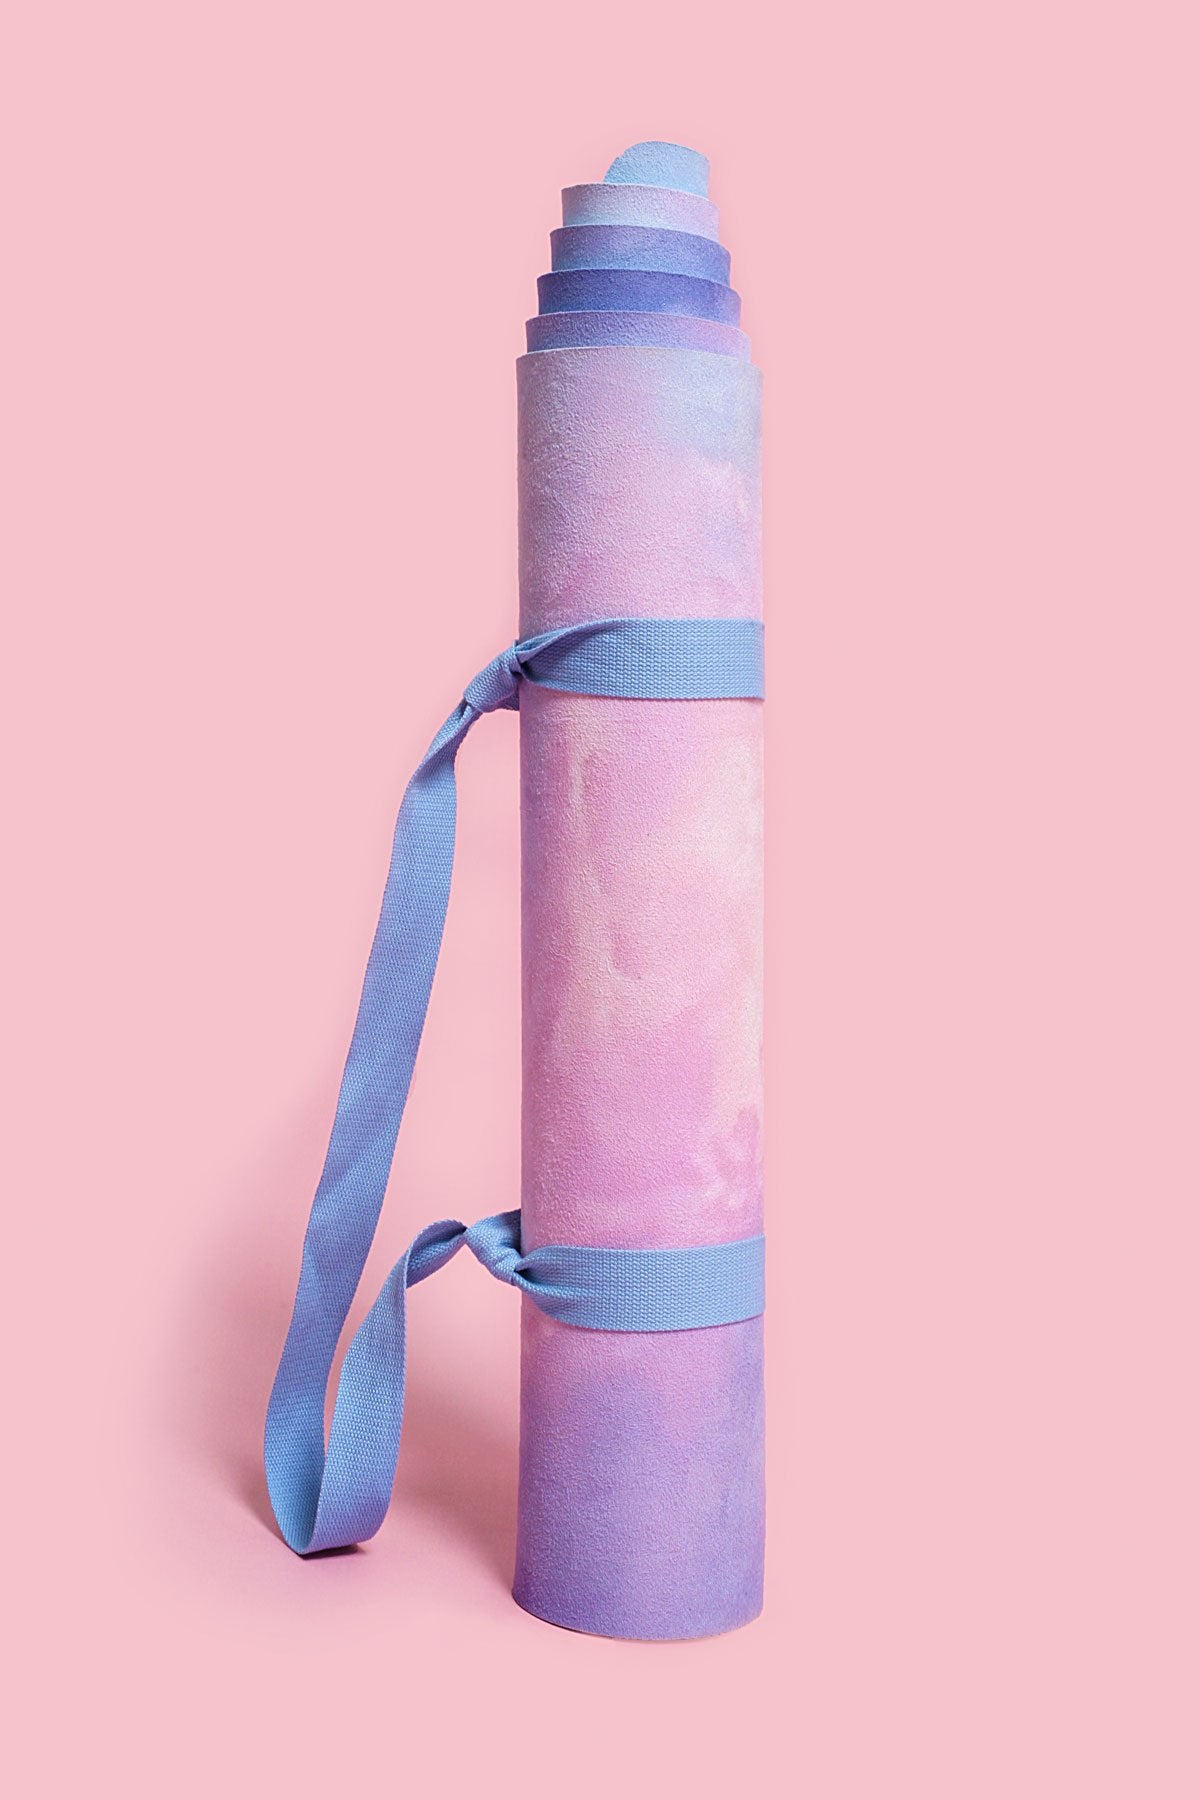 My Joints Have Never Loved a Product More: A Peek at the CloudCushion Yoga  Mat - Blogilates